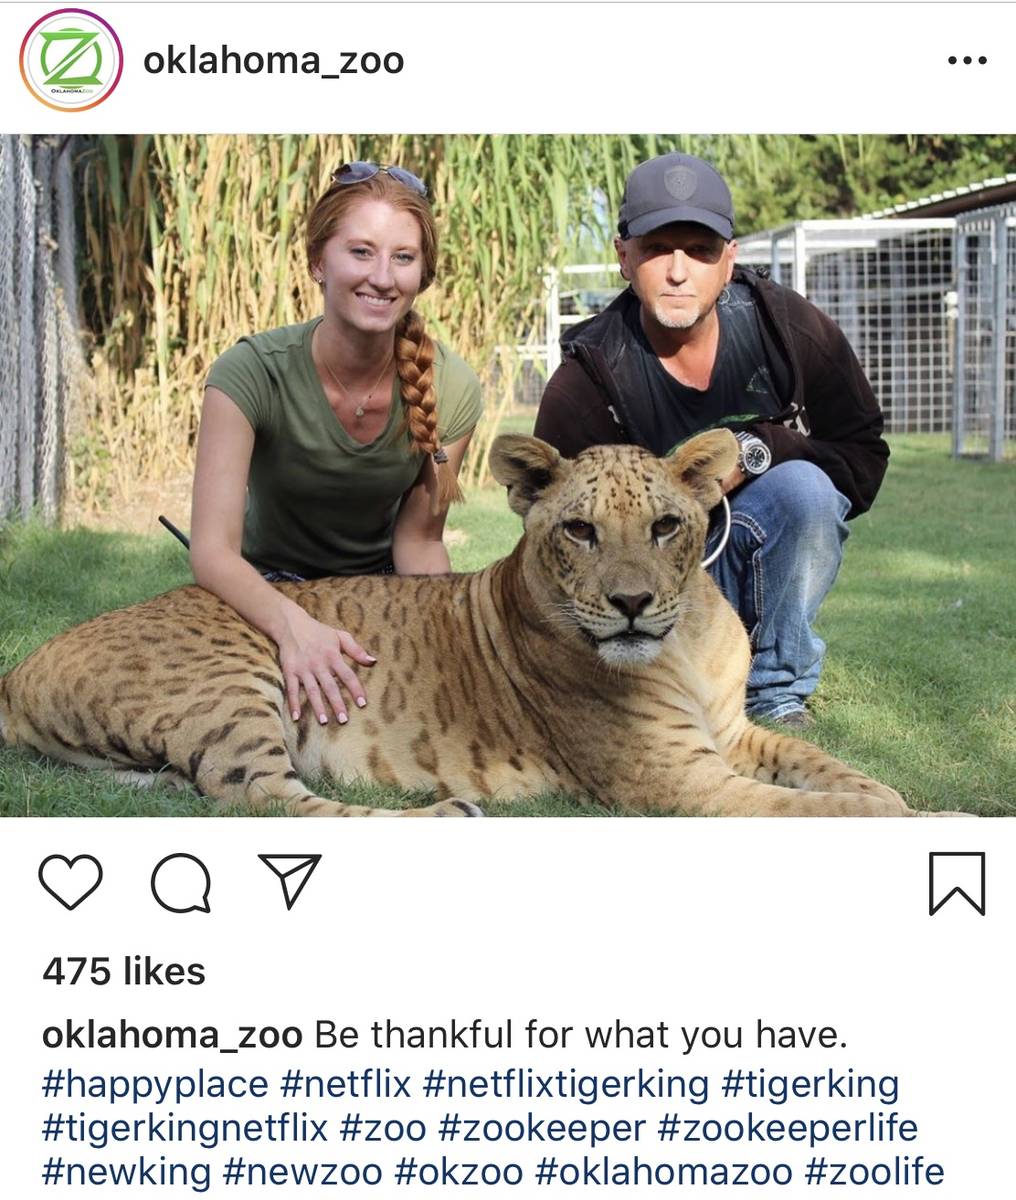 Jeff and Lauren Lowe are shown on the Oklahoma Zoo Instagram page. (@Oklahoma_Zoo)